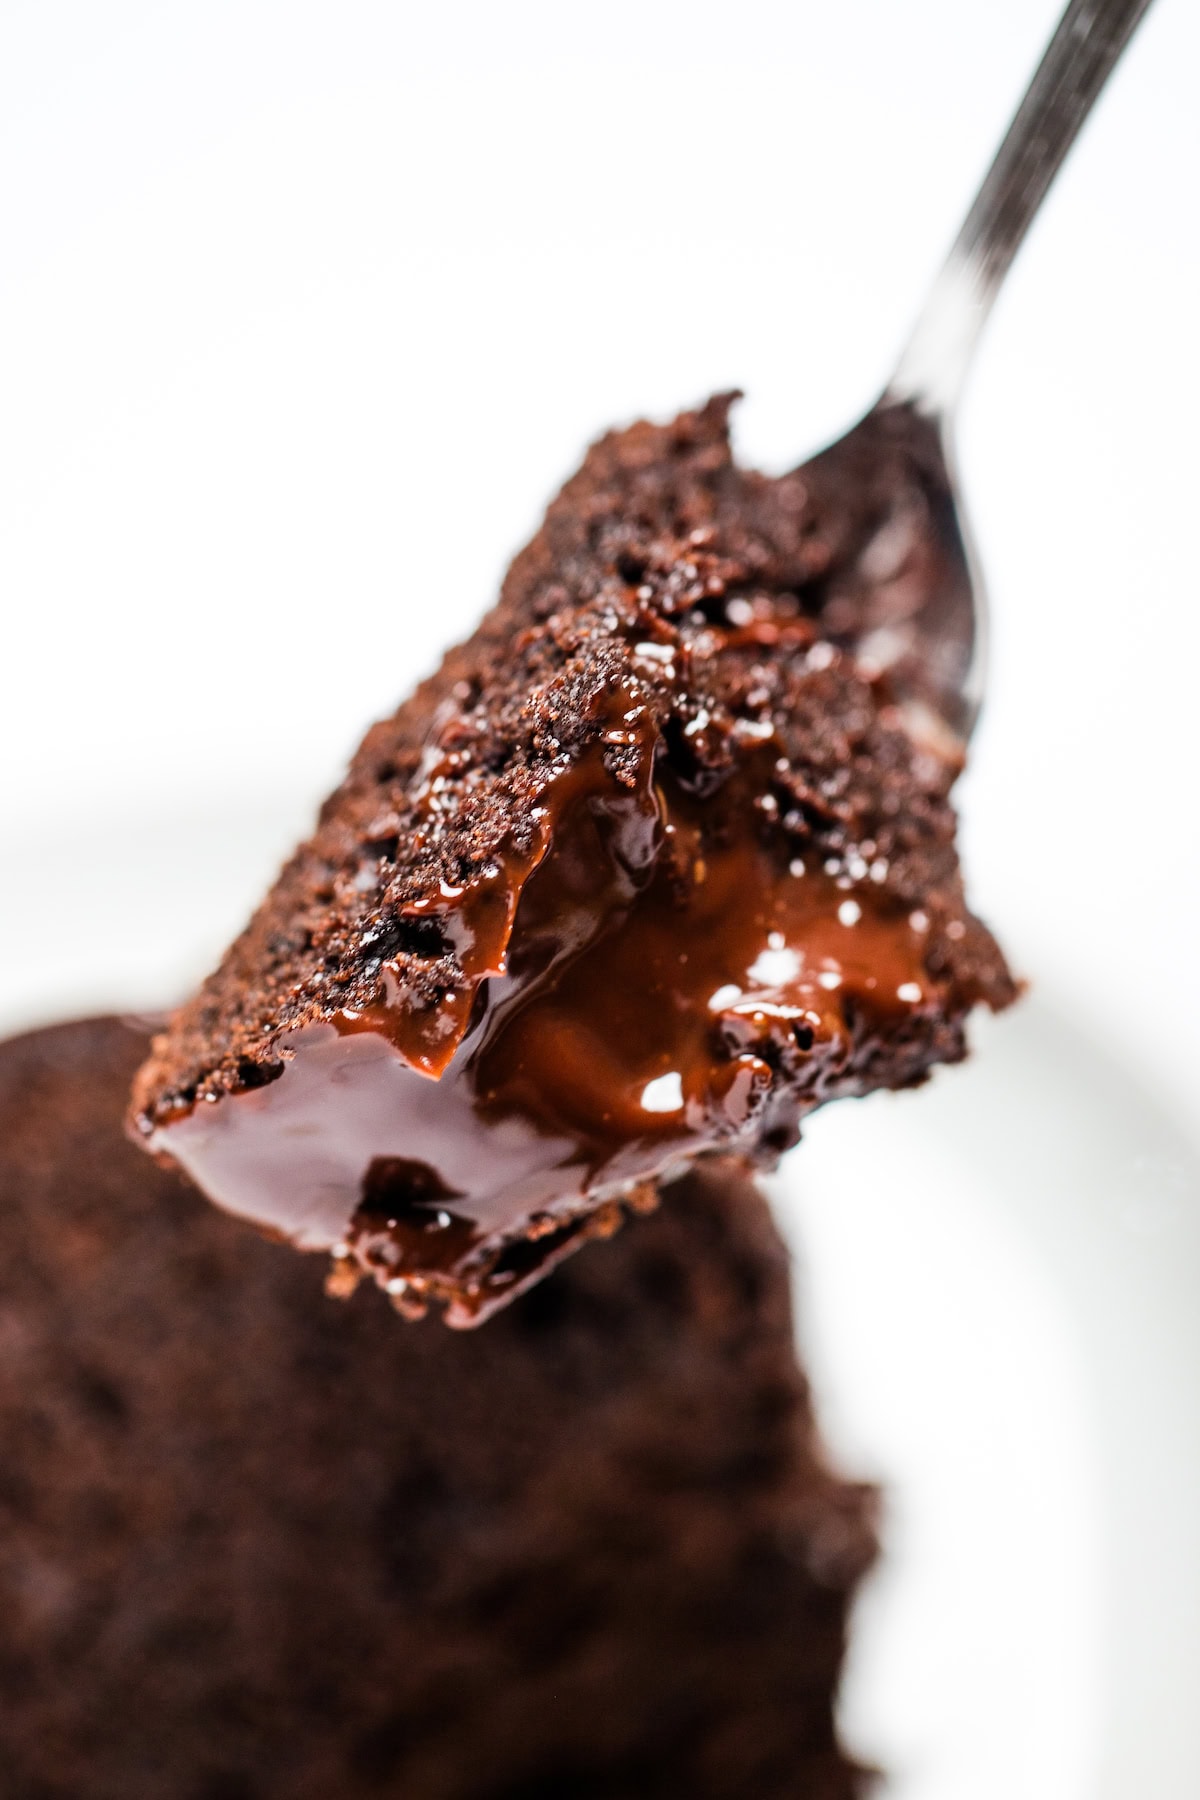 A closeup of a fork full of chocolate brownie cake with a creamy chocolate ganache on top, with a piece of cake in the background.